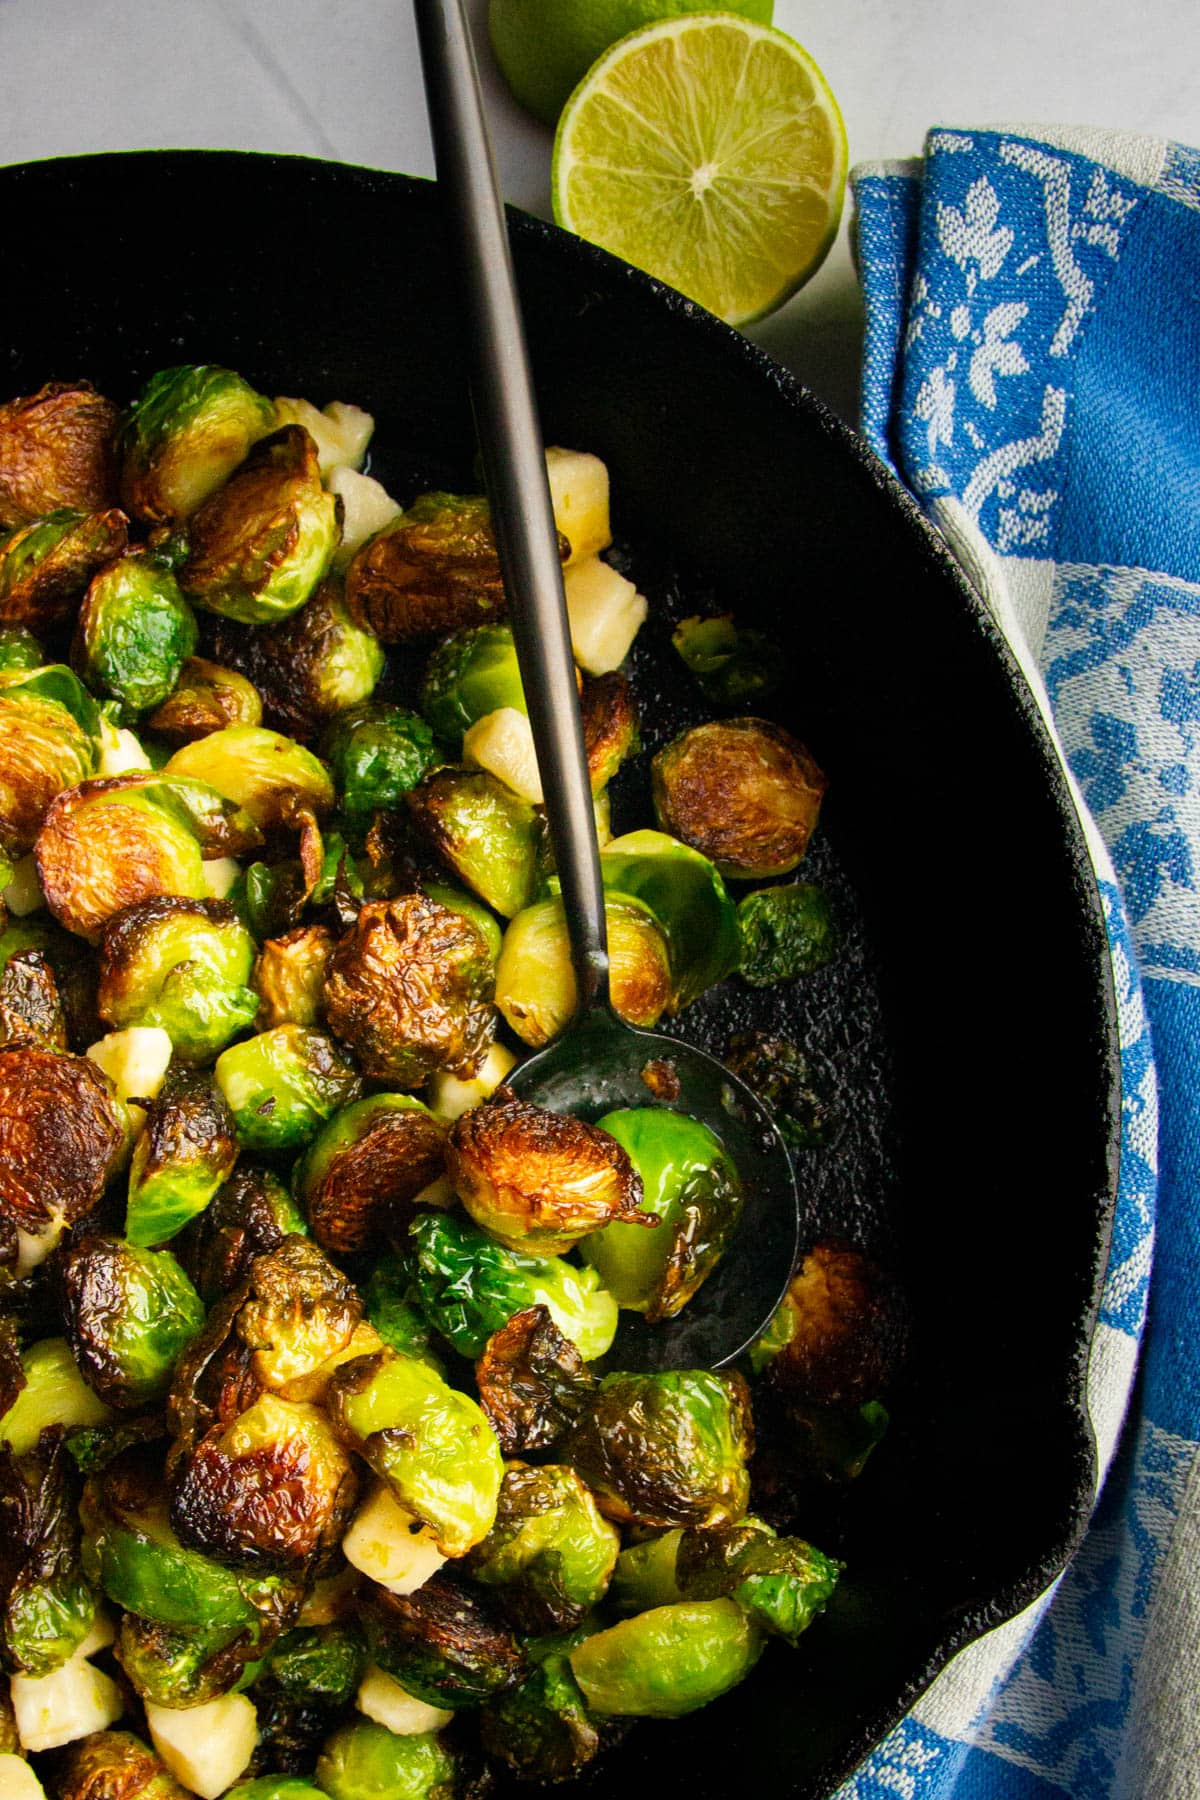 A spoon in the pan of the crispy roasted brussel sprouts.